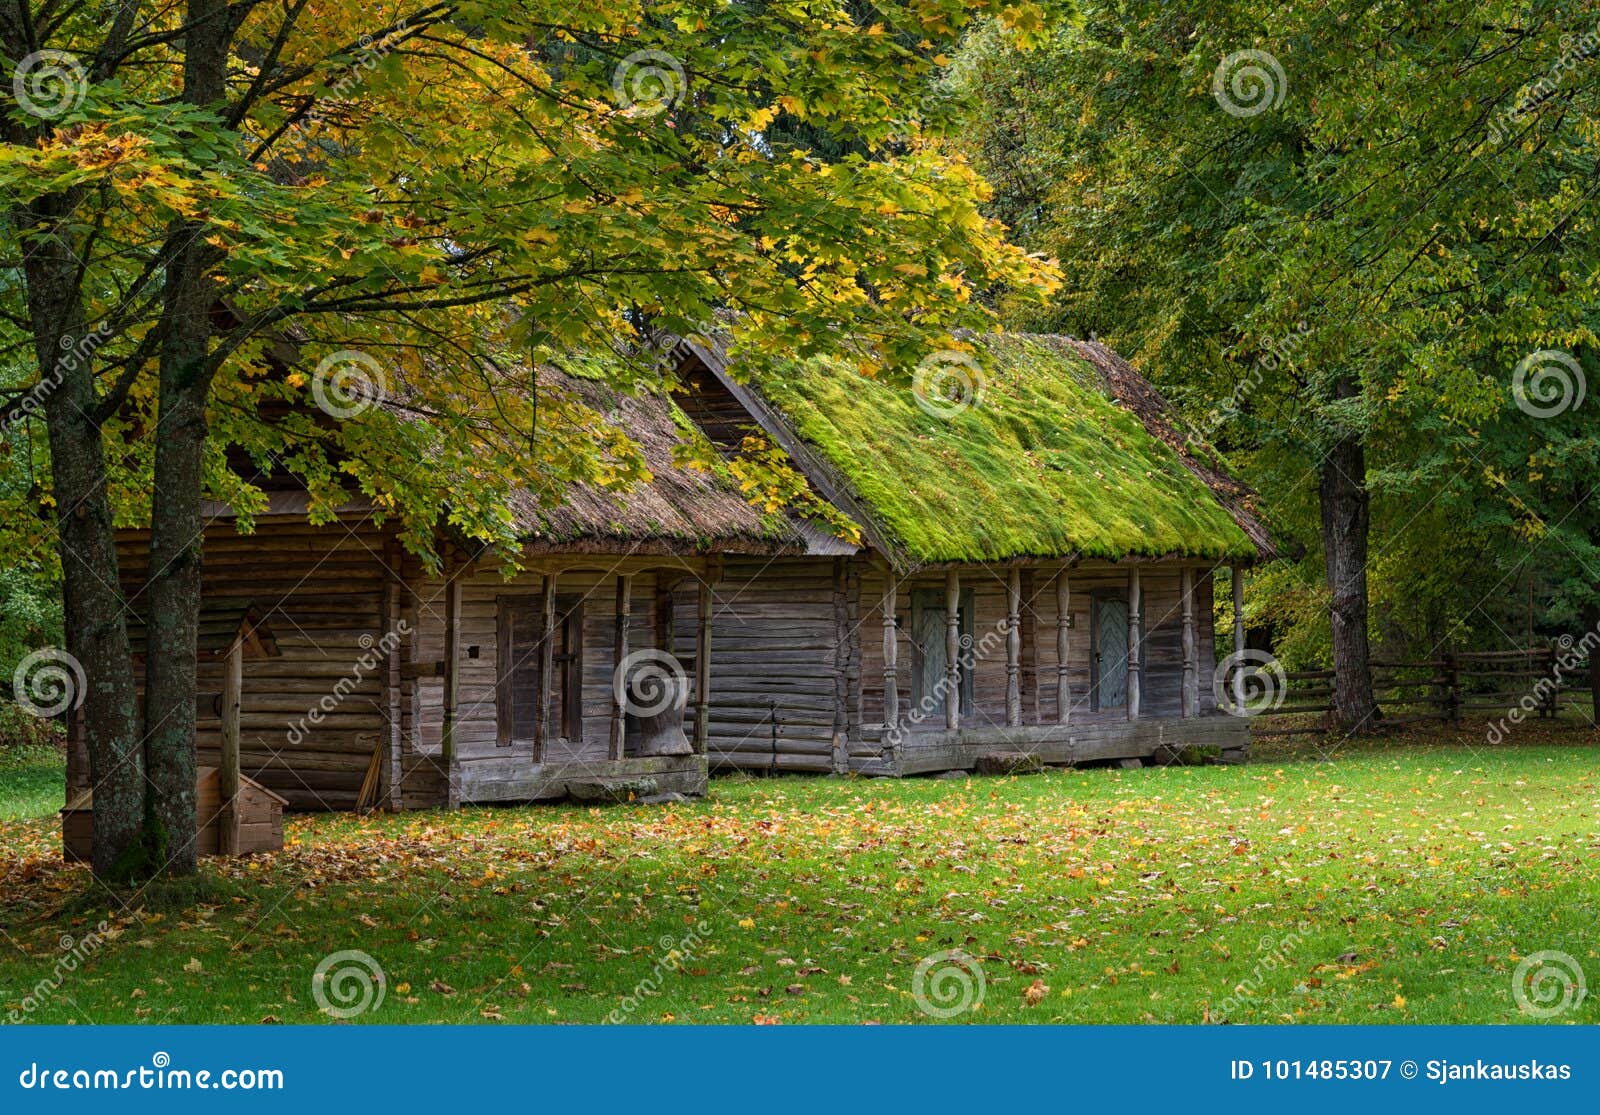 ancient country house rural scene lithuania